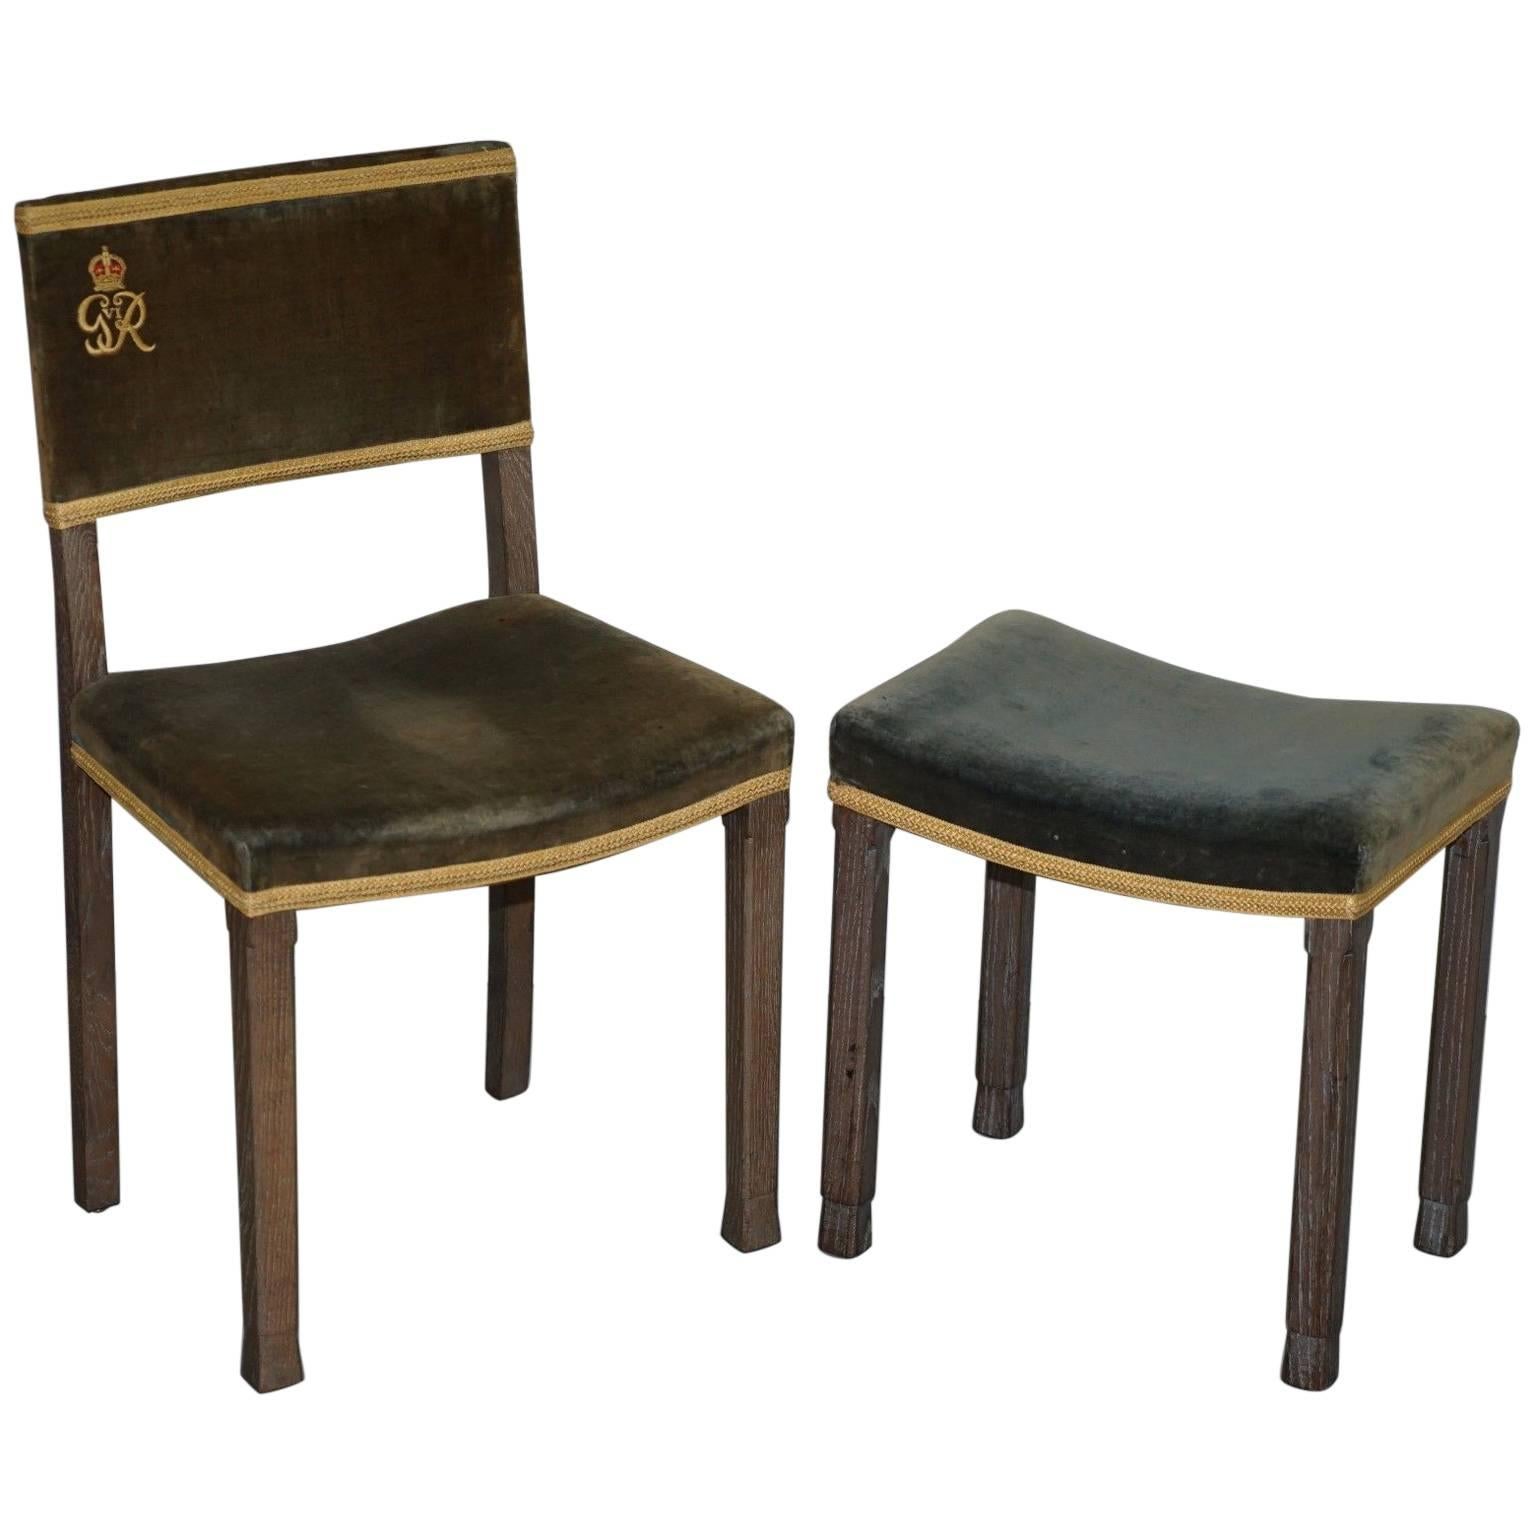 Exceptional 1937 King George VI Coronation Chair and Stool Fully Stamped